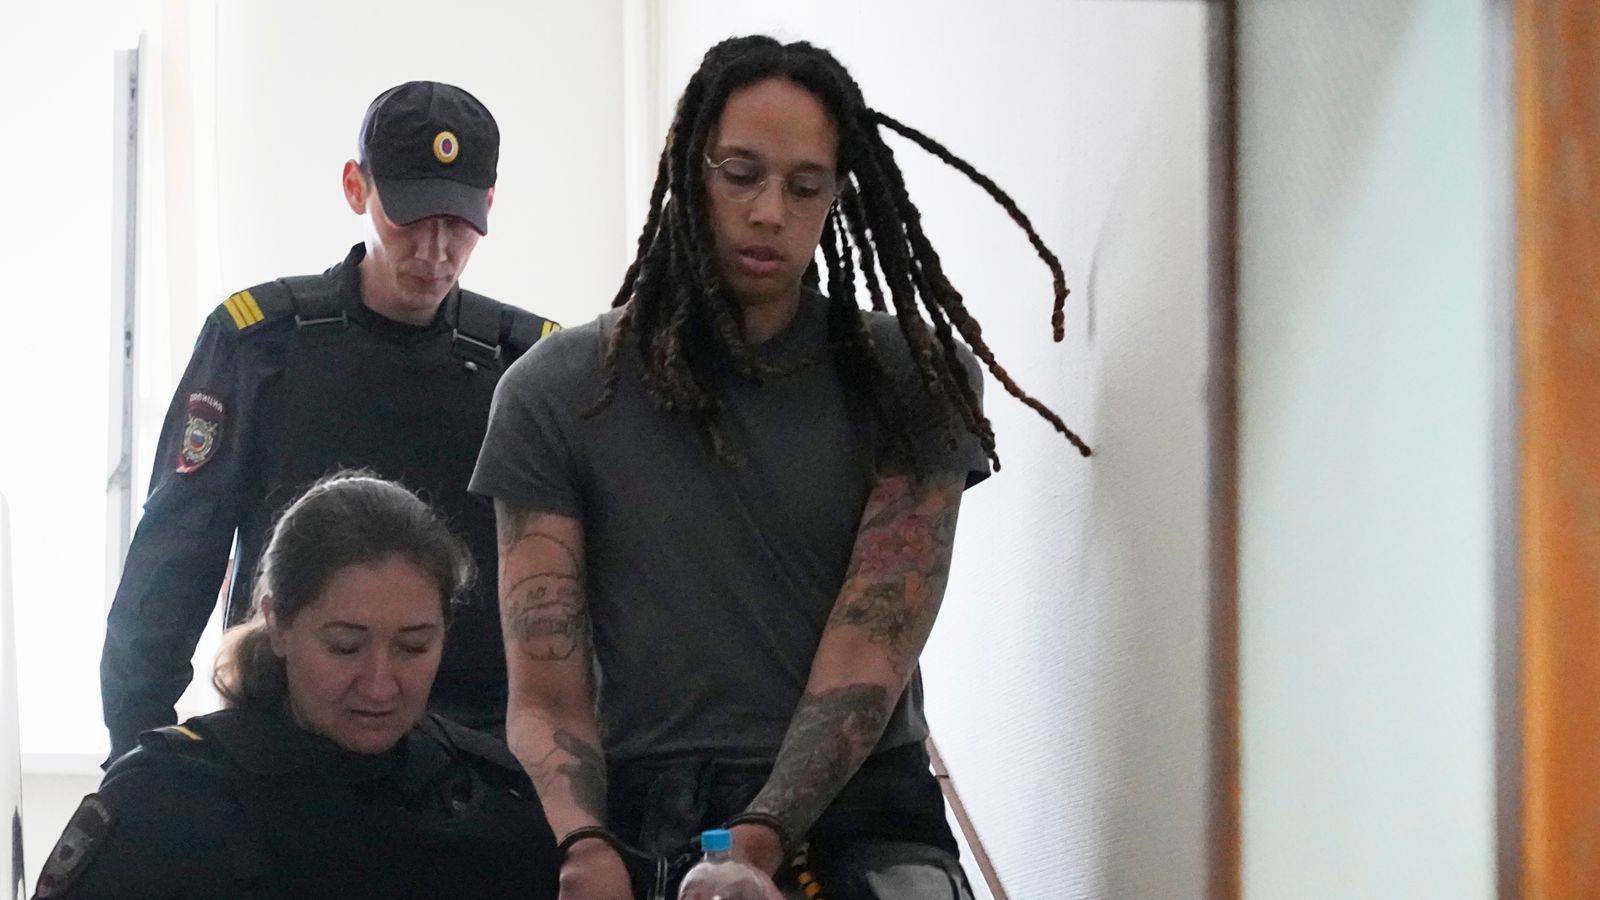 Brittney Griner: US basketball star to stand trial in Russian court on drug charges